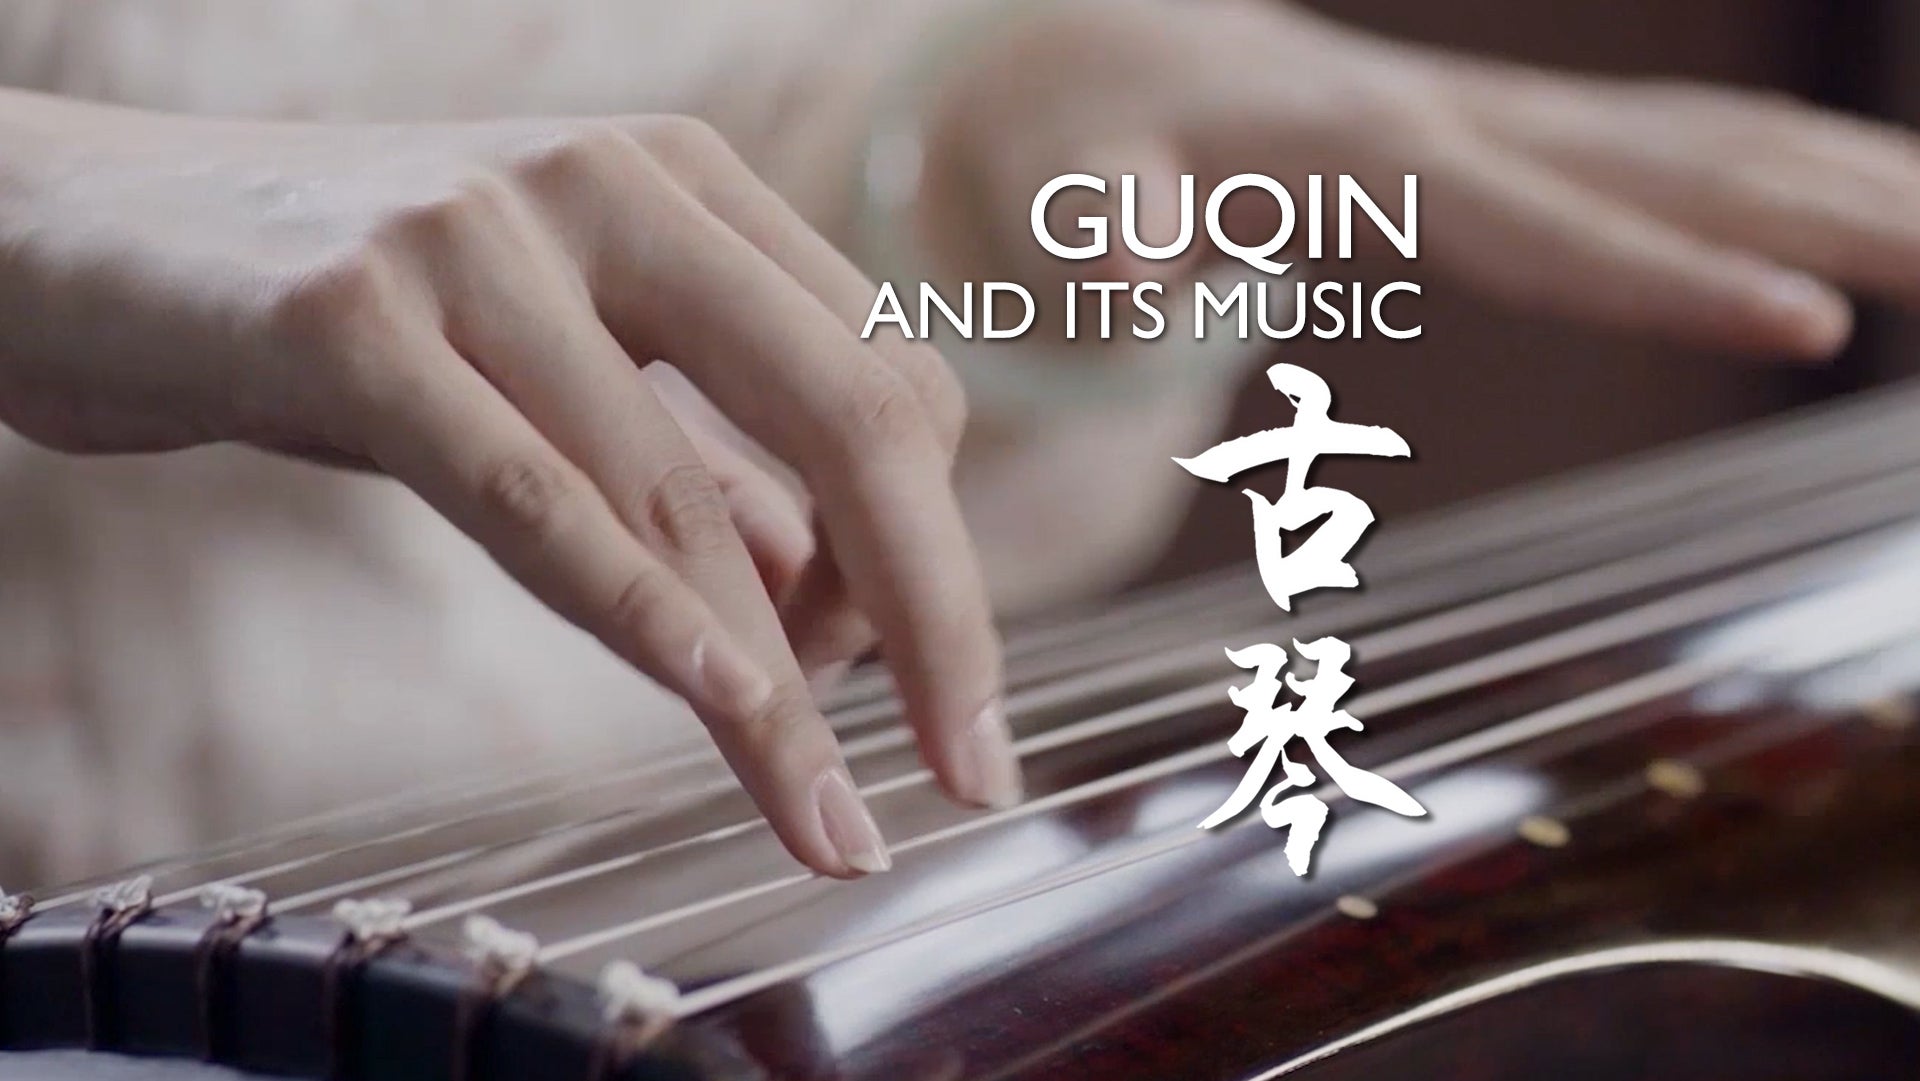 Guqin : a plucked seven-string instrument created in ancient China